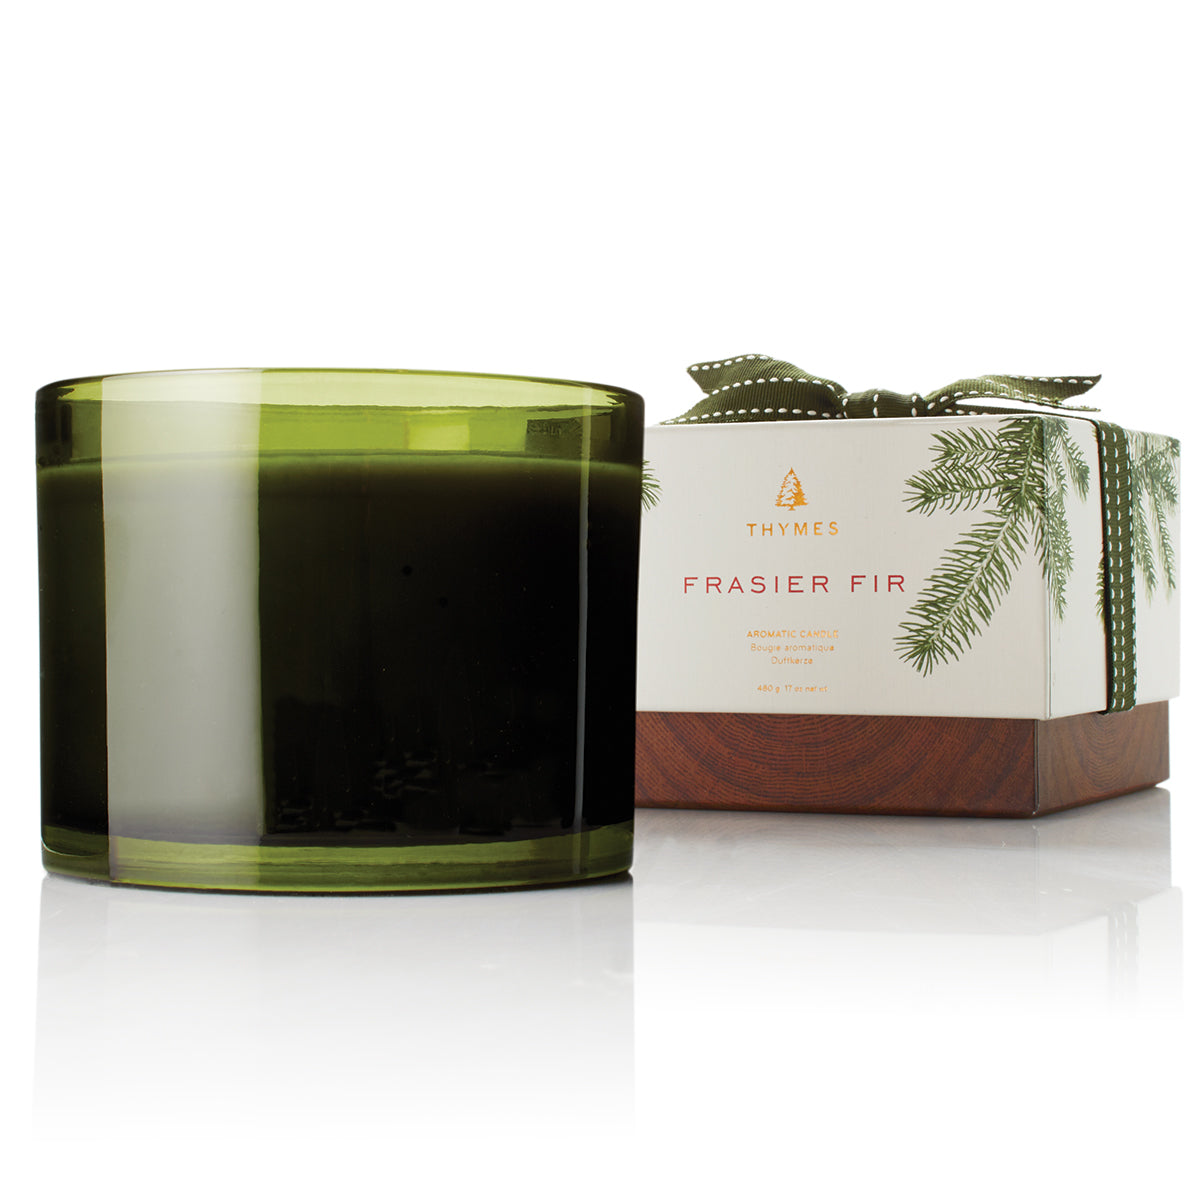 Thymes Frasier Fir Poured Candle, Pine Needle 3-Wick